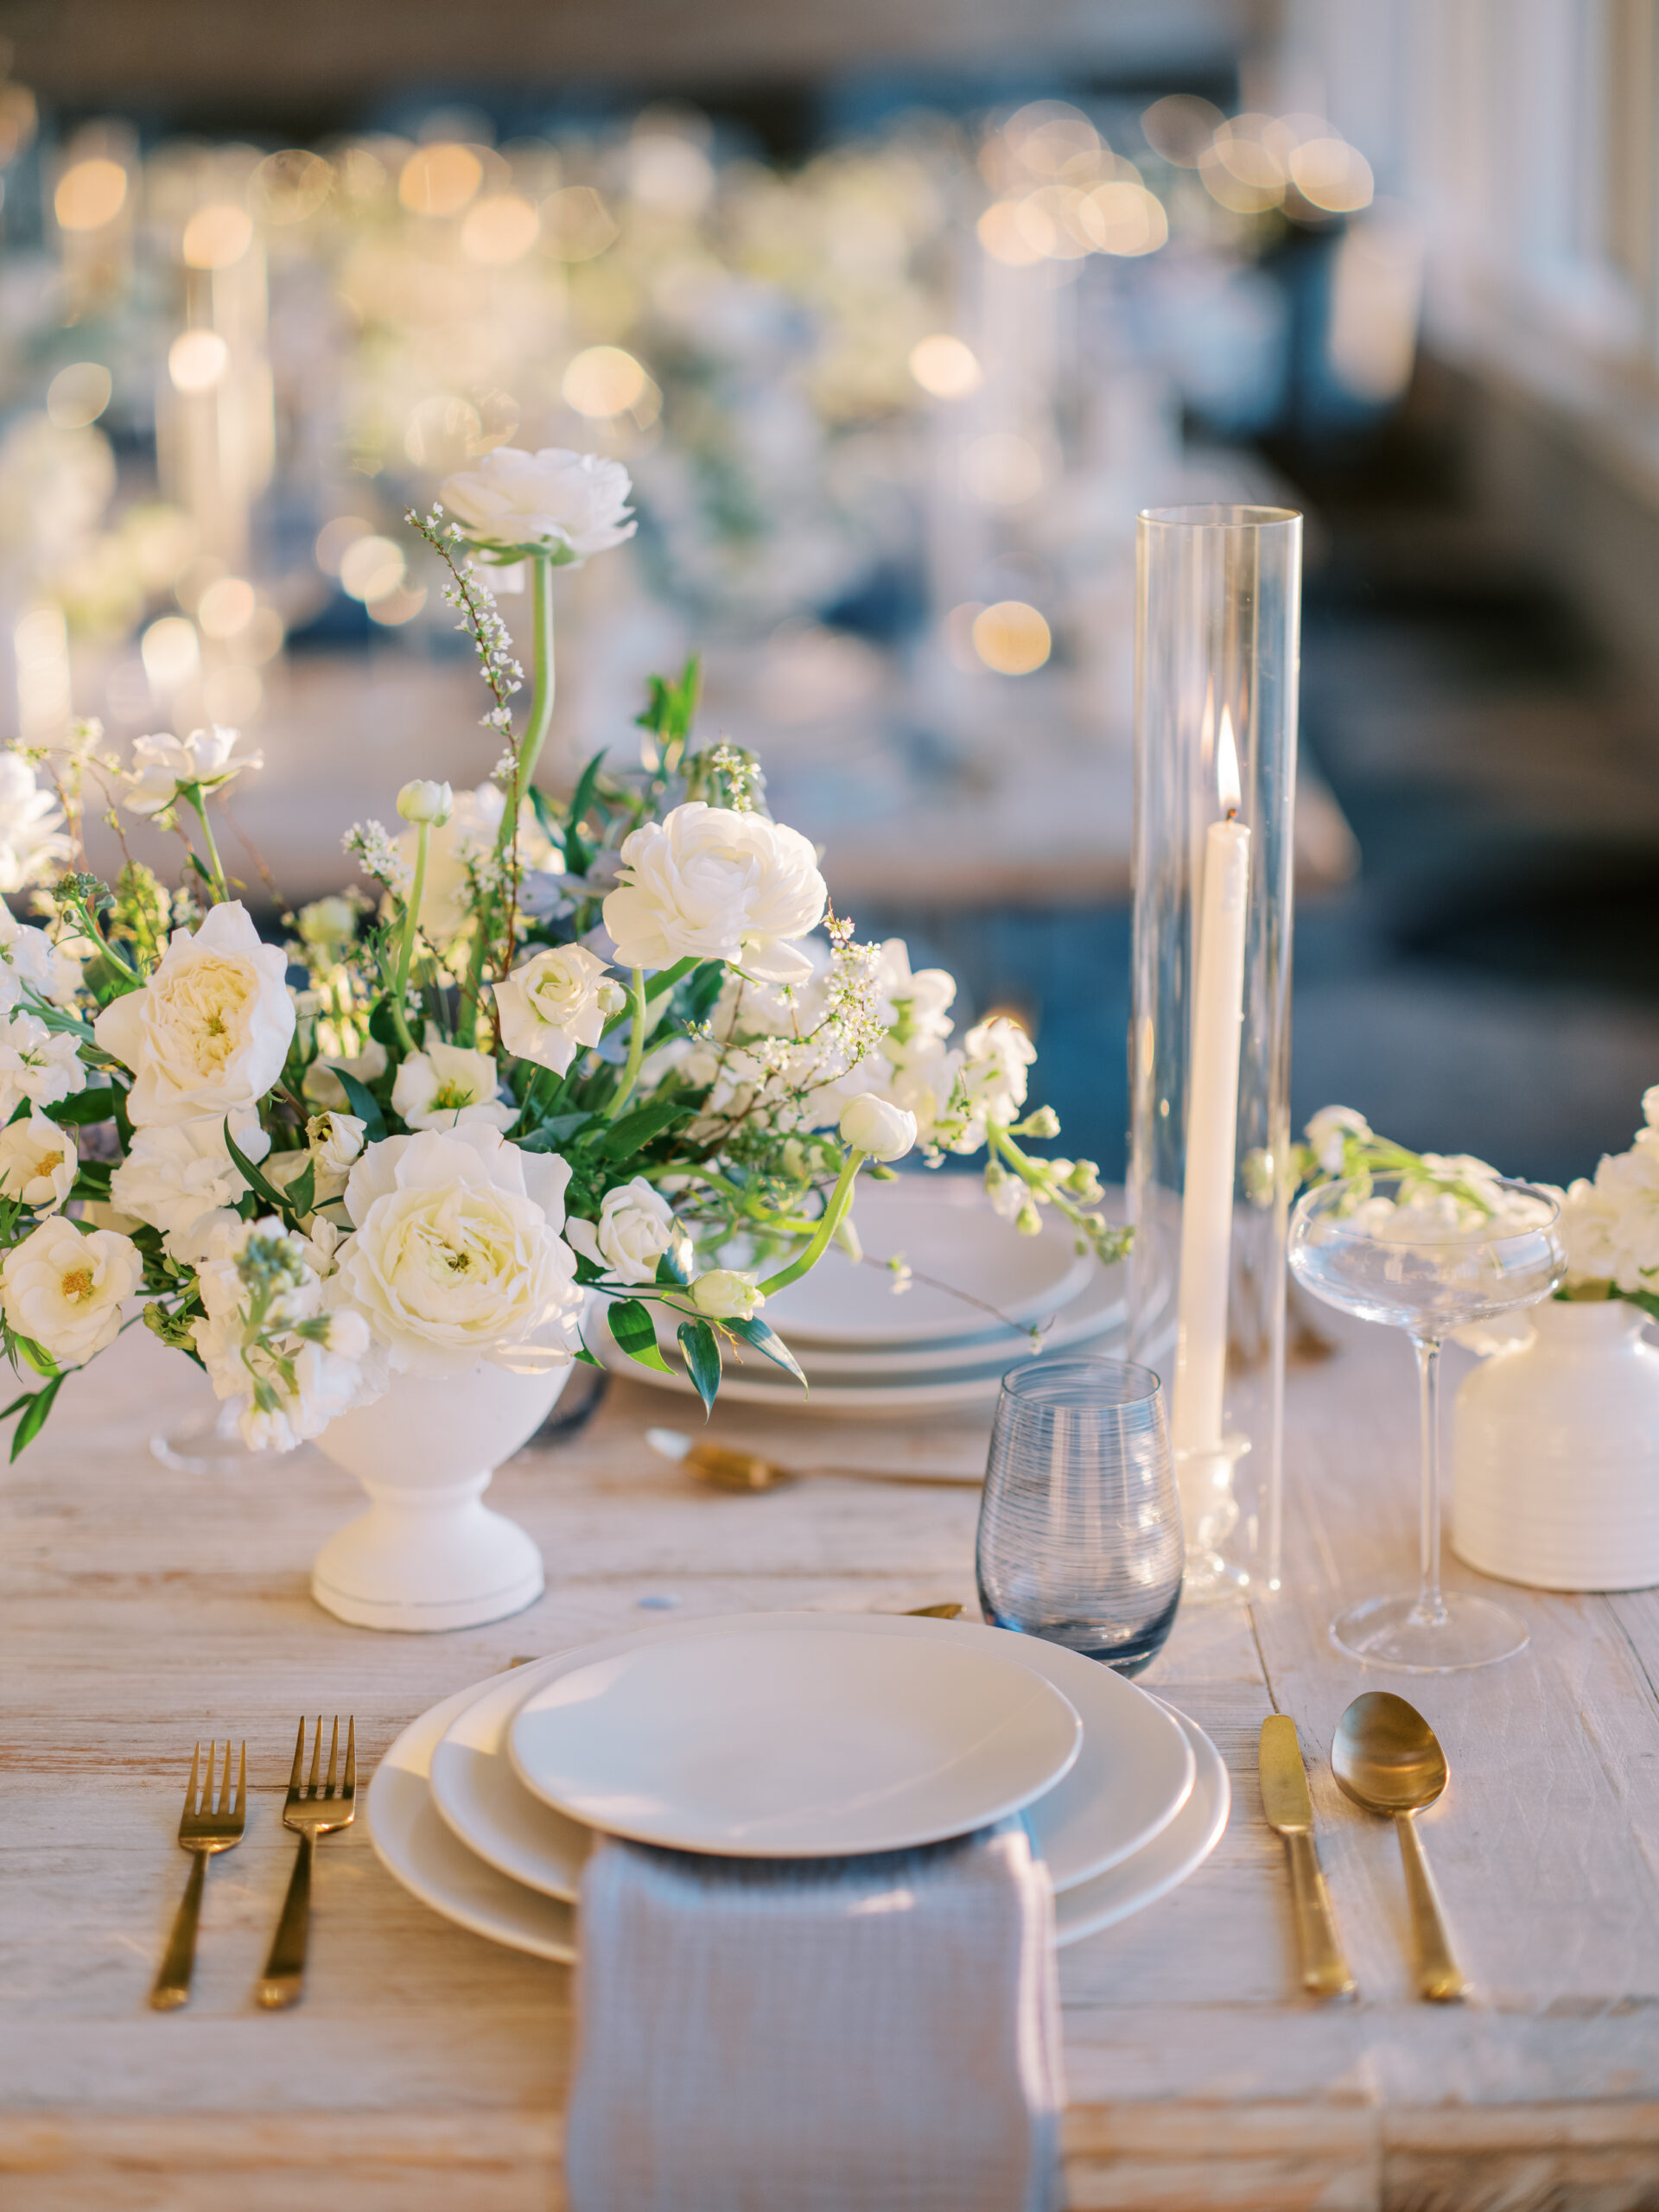 Tablescape at The Marine Room